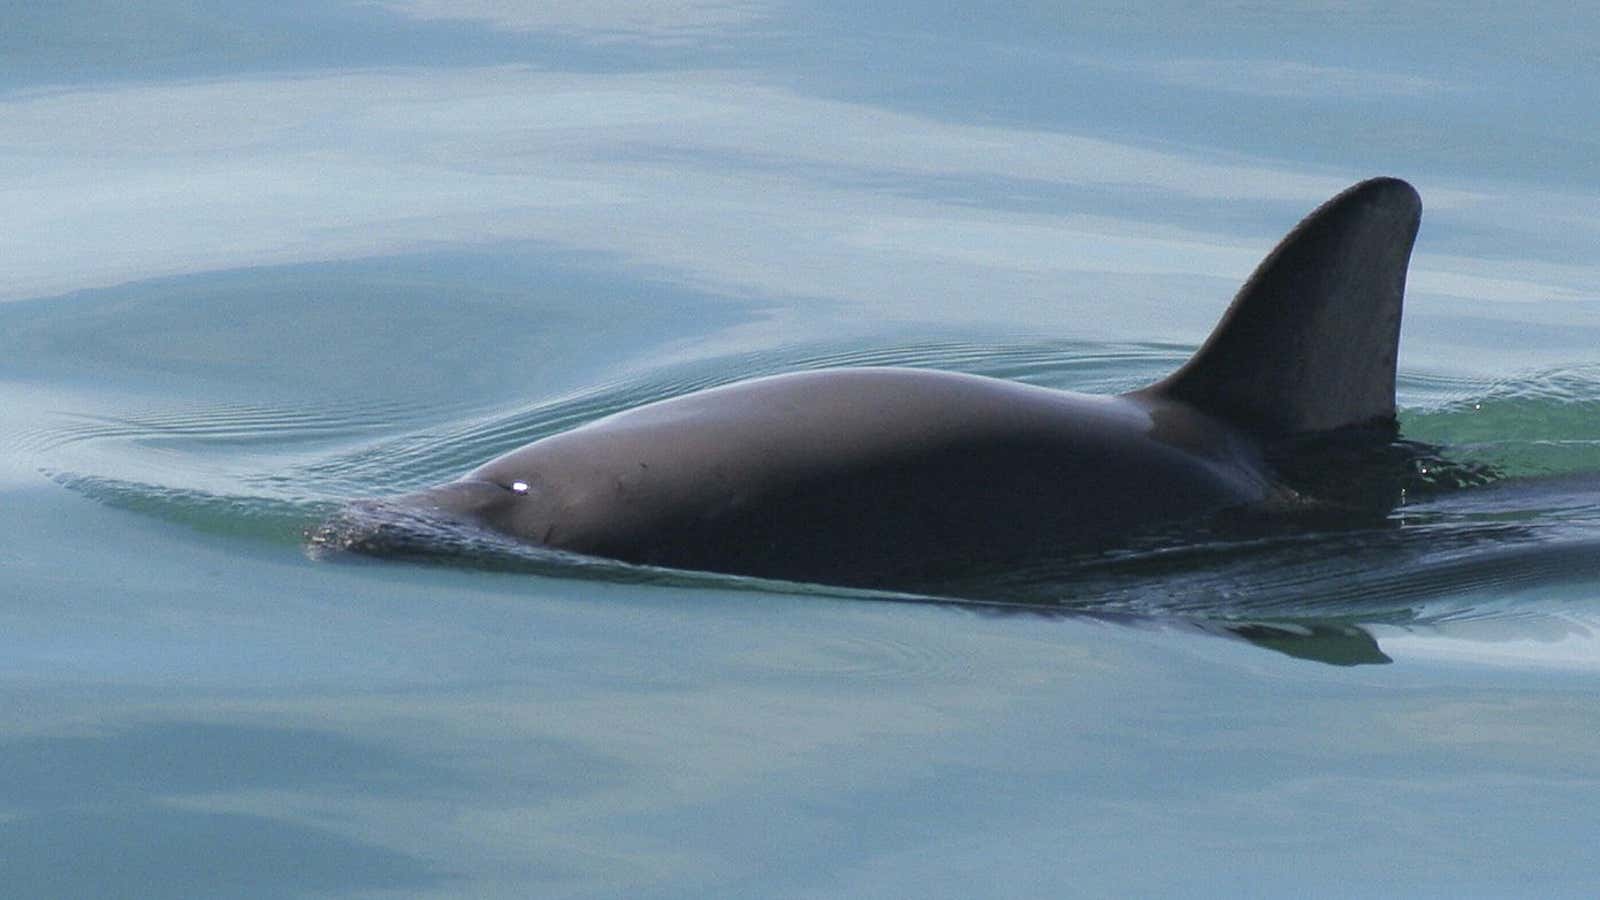 Illegal totoaba fishing is killing off the vaquita porpoise.